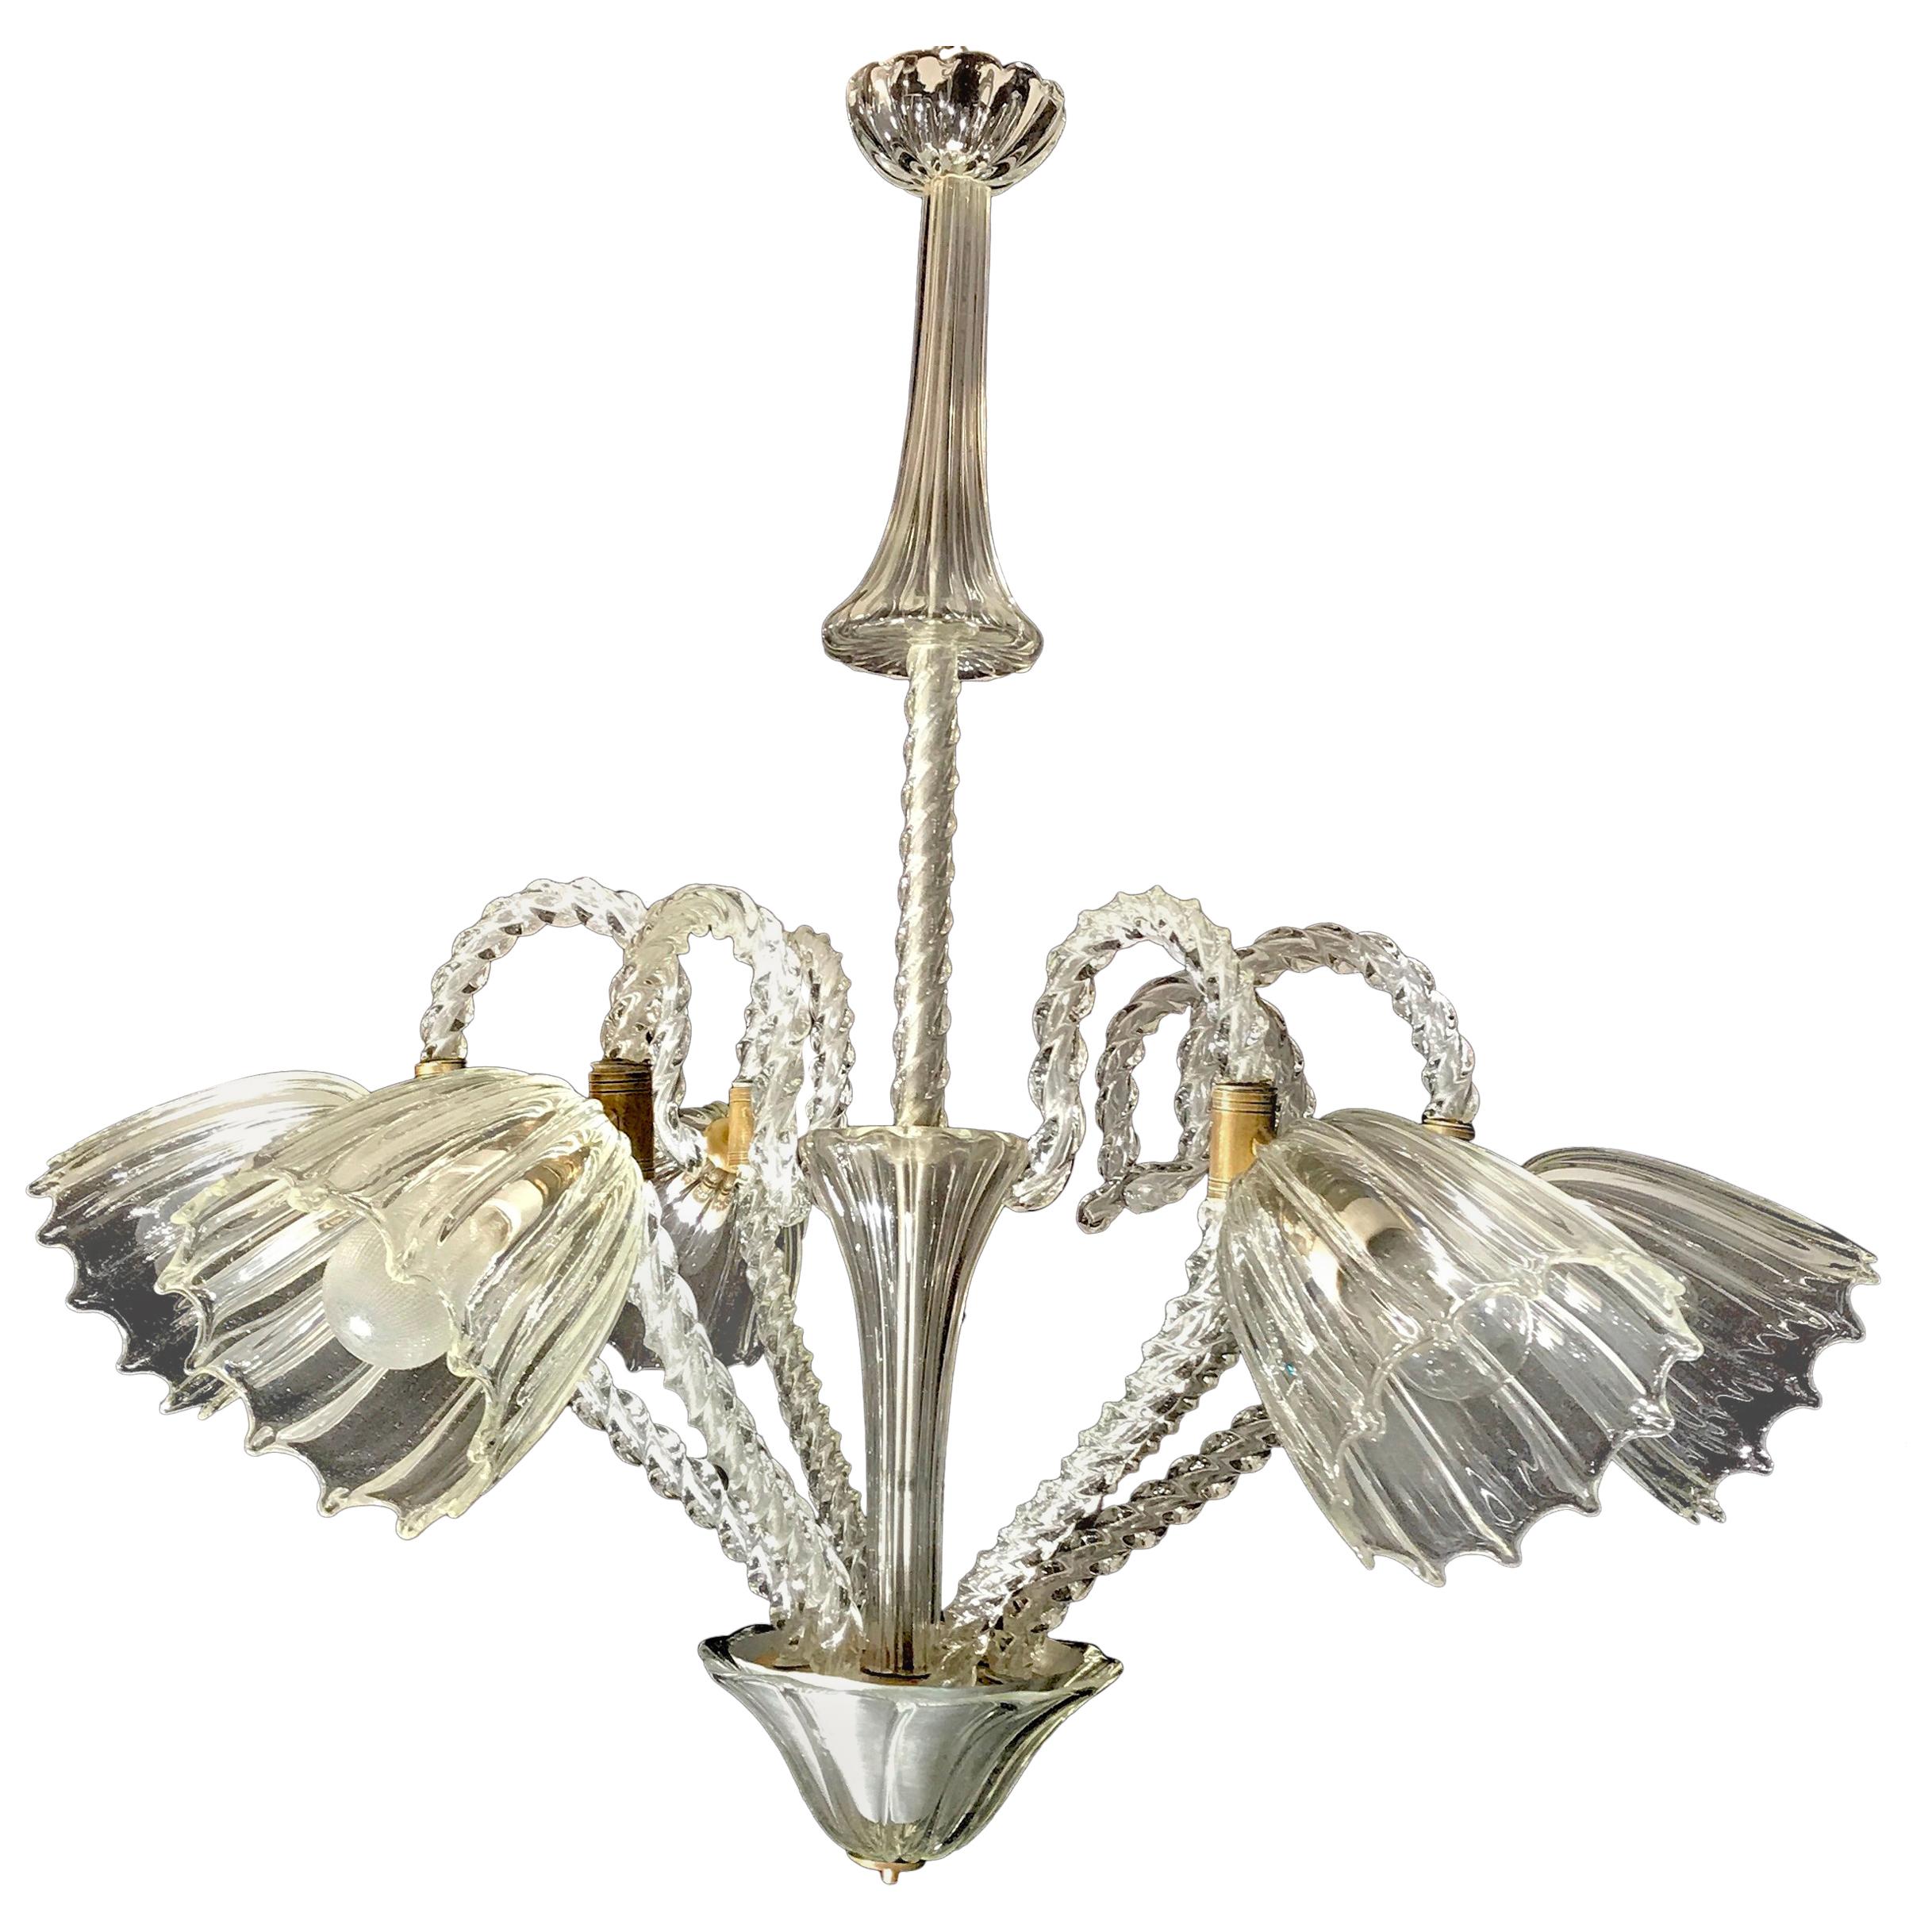 Liberty Chandelier by Ercole Barovier Murano, 1940s